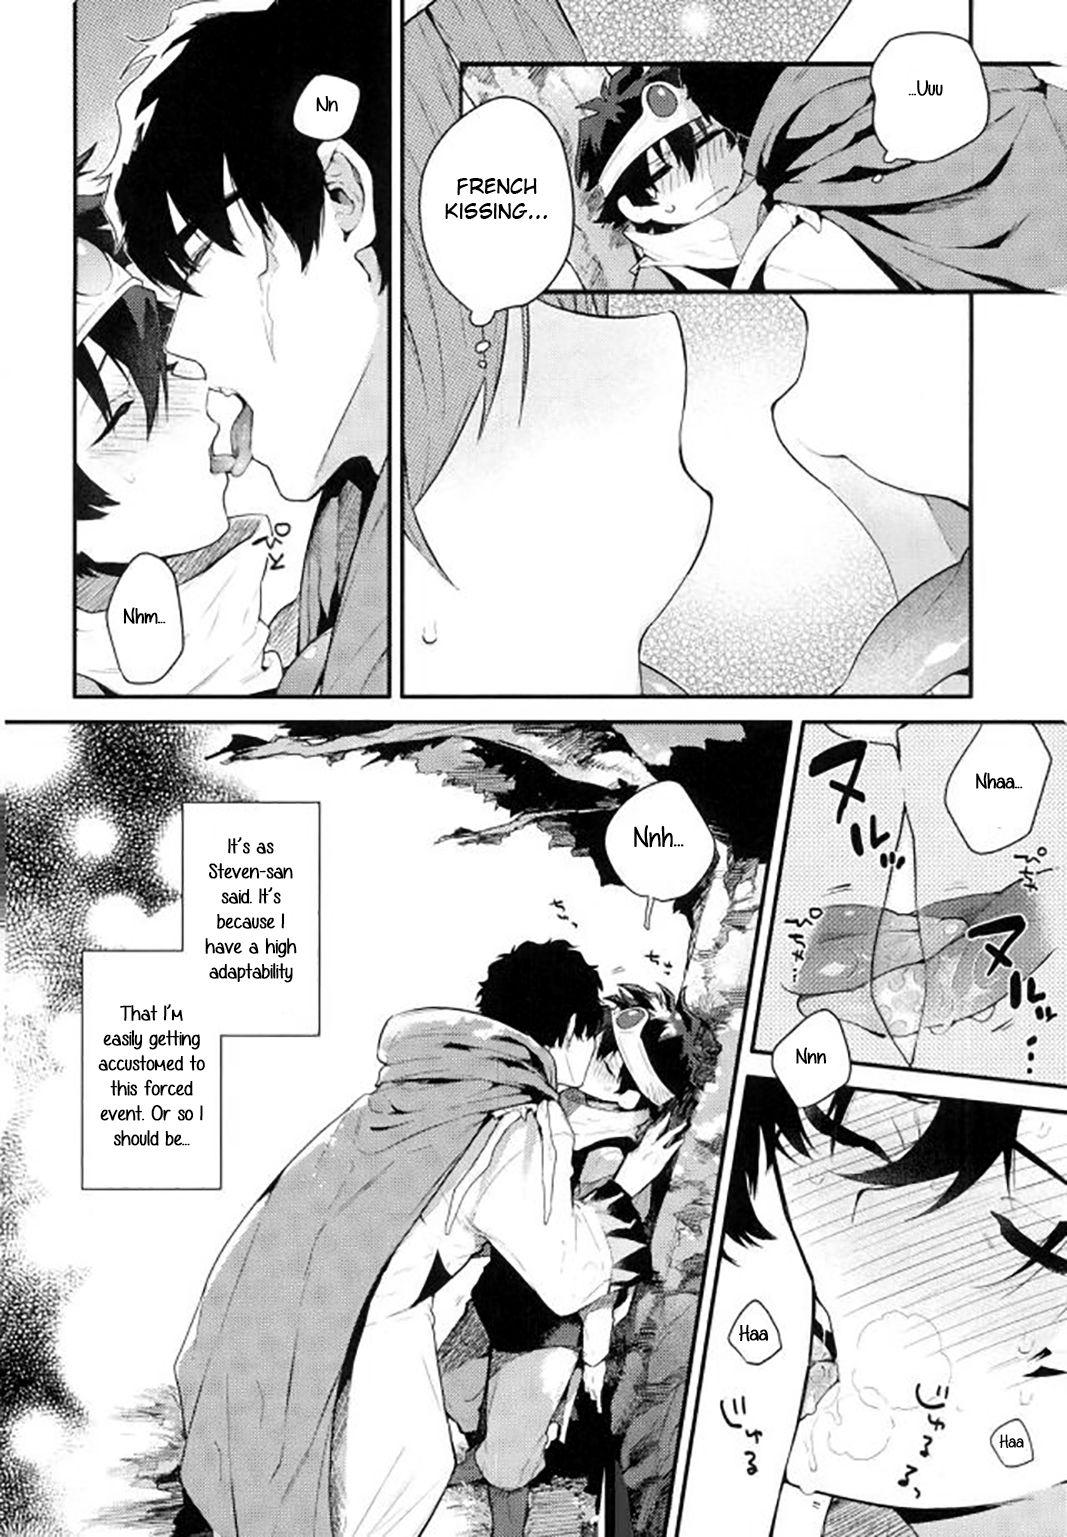 Load After Being Sent to Another World I'm Forced to a Love Event With My Boss!? - Kekkai sensen Hairy Pussy - Page 7